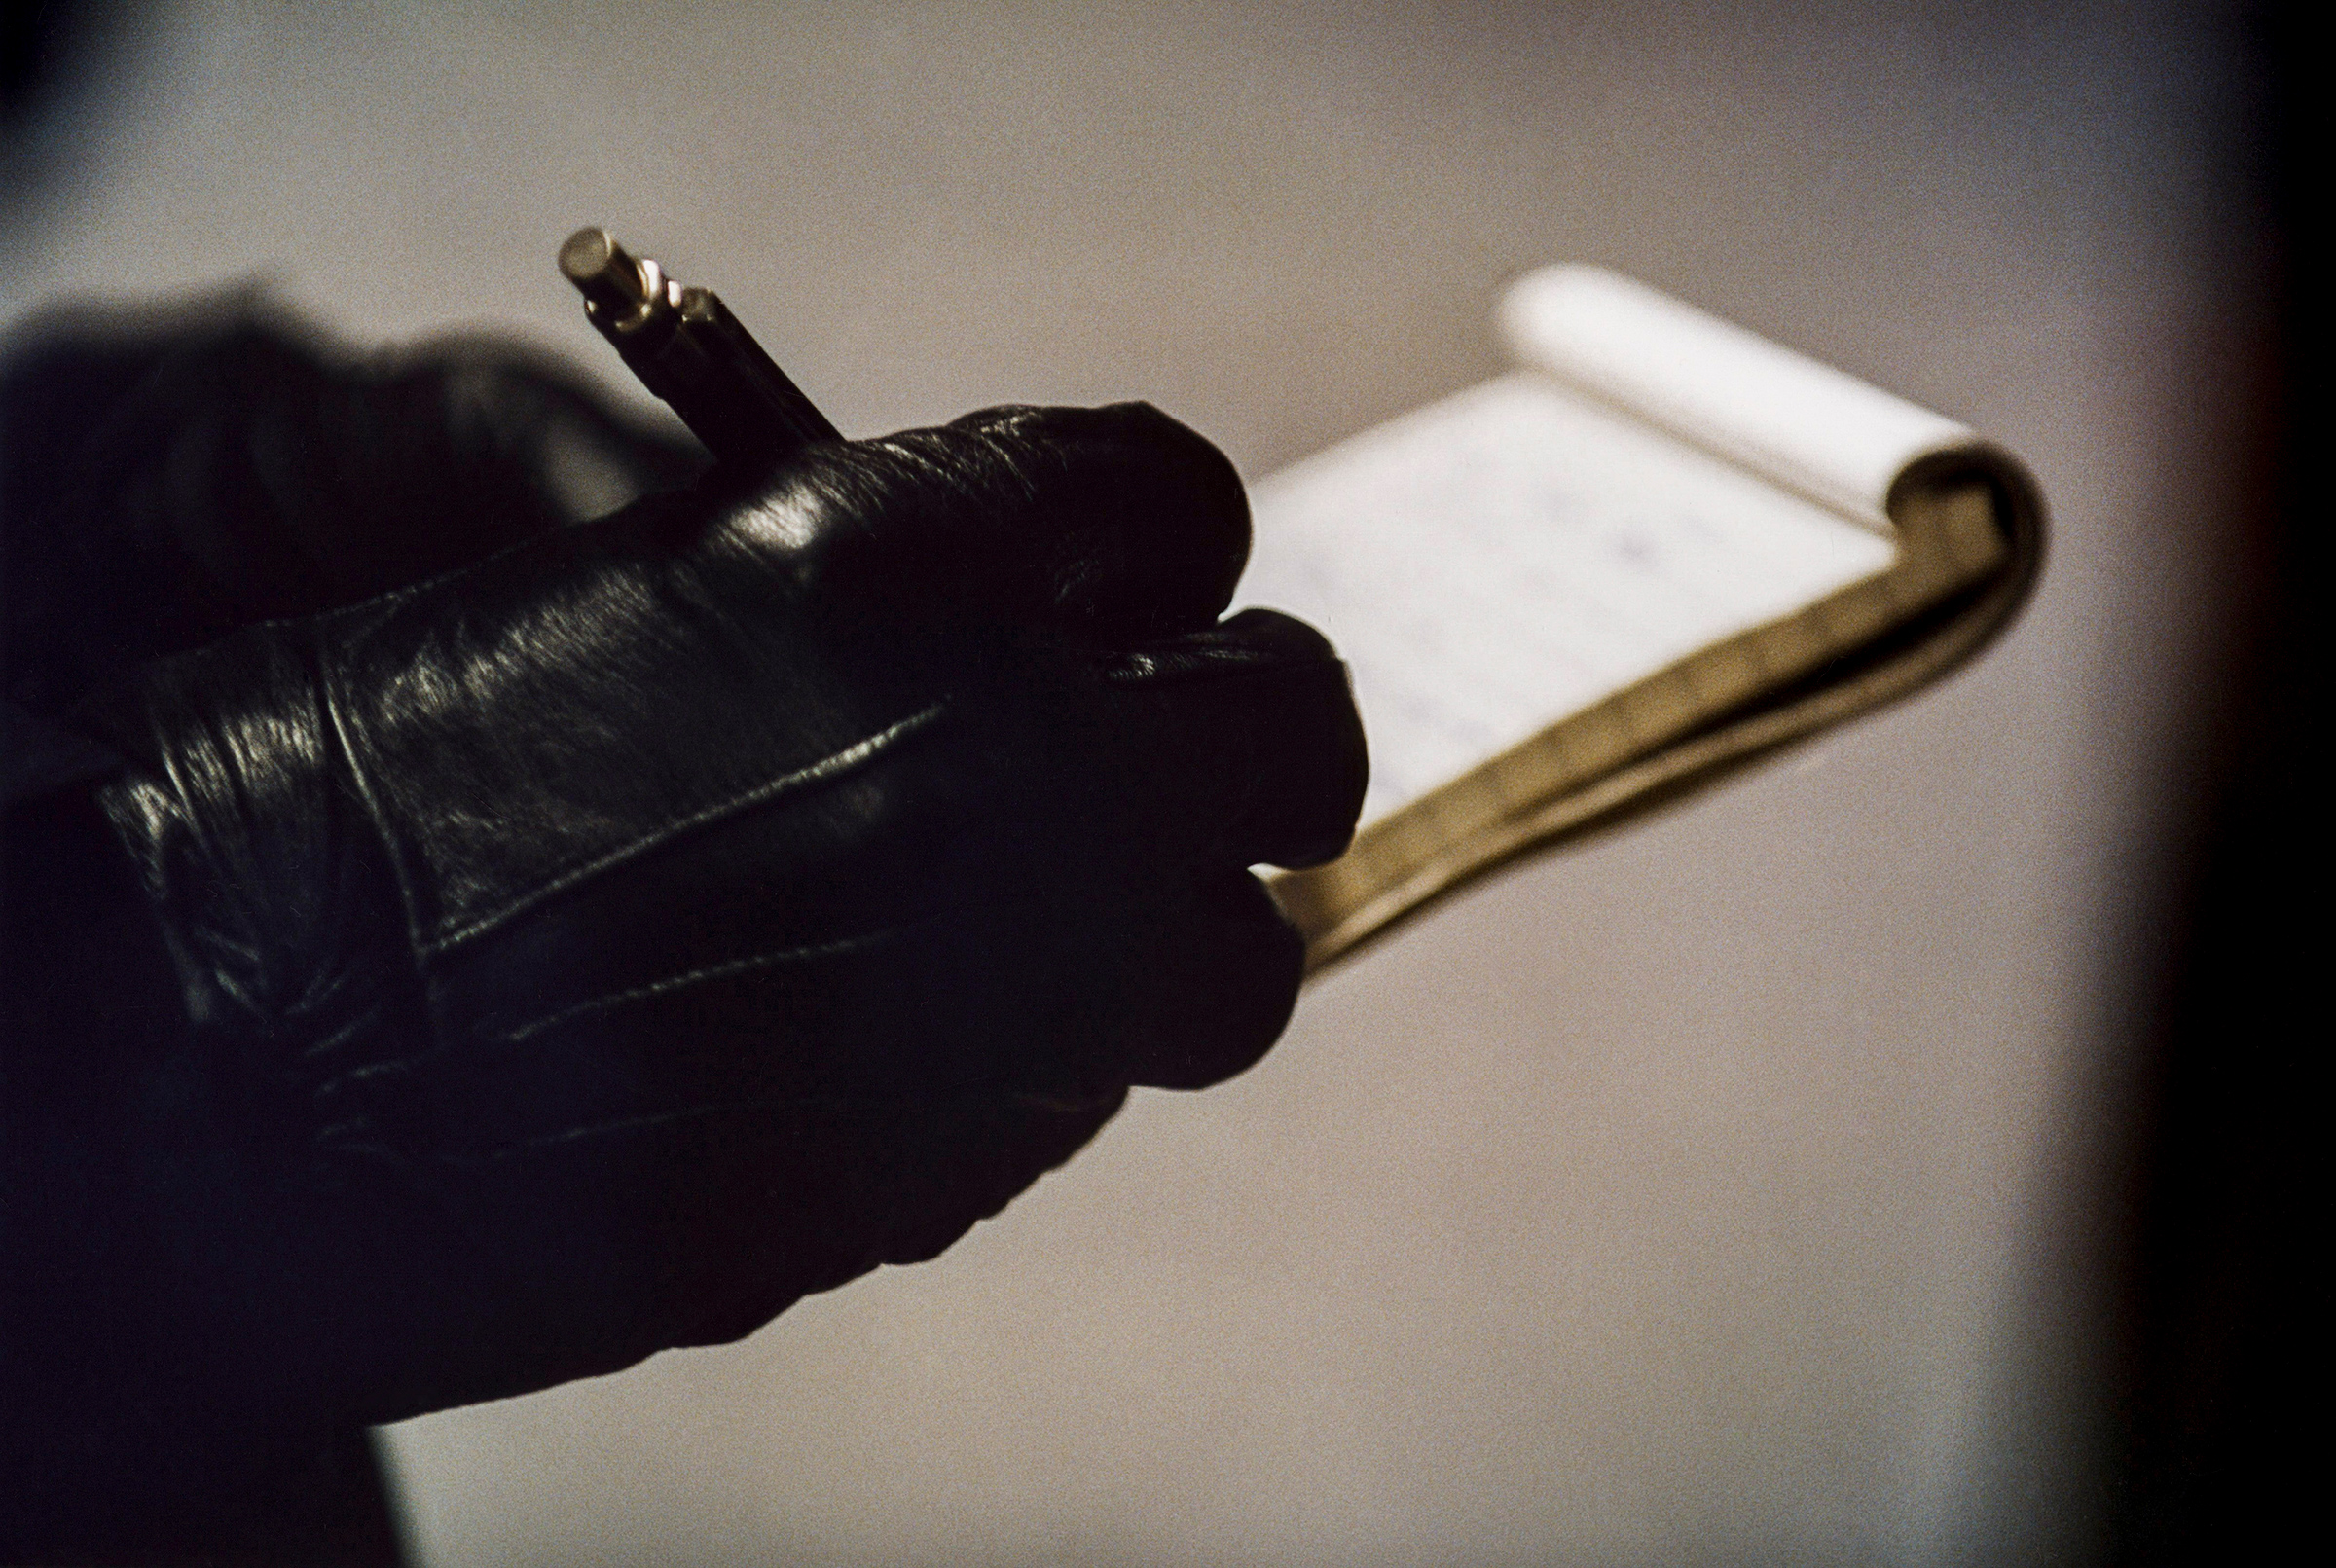 A police officer's hand in gloves write on a notepad. (Jan Hakan Dahlstrom—Getty Images)